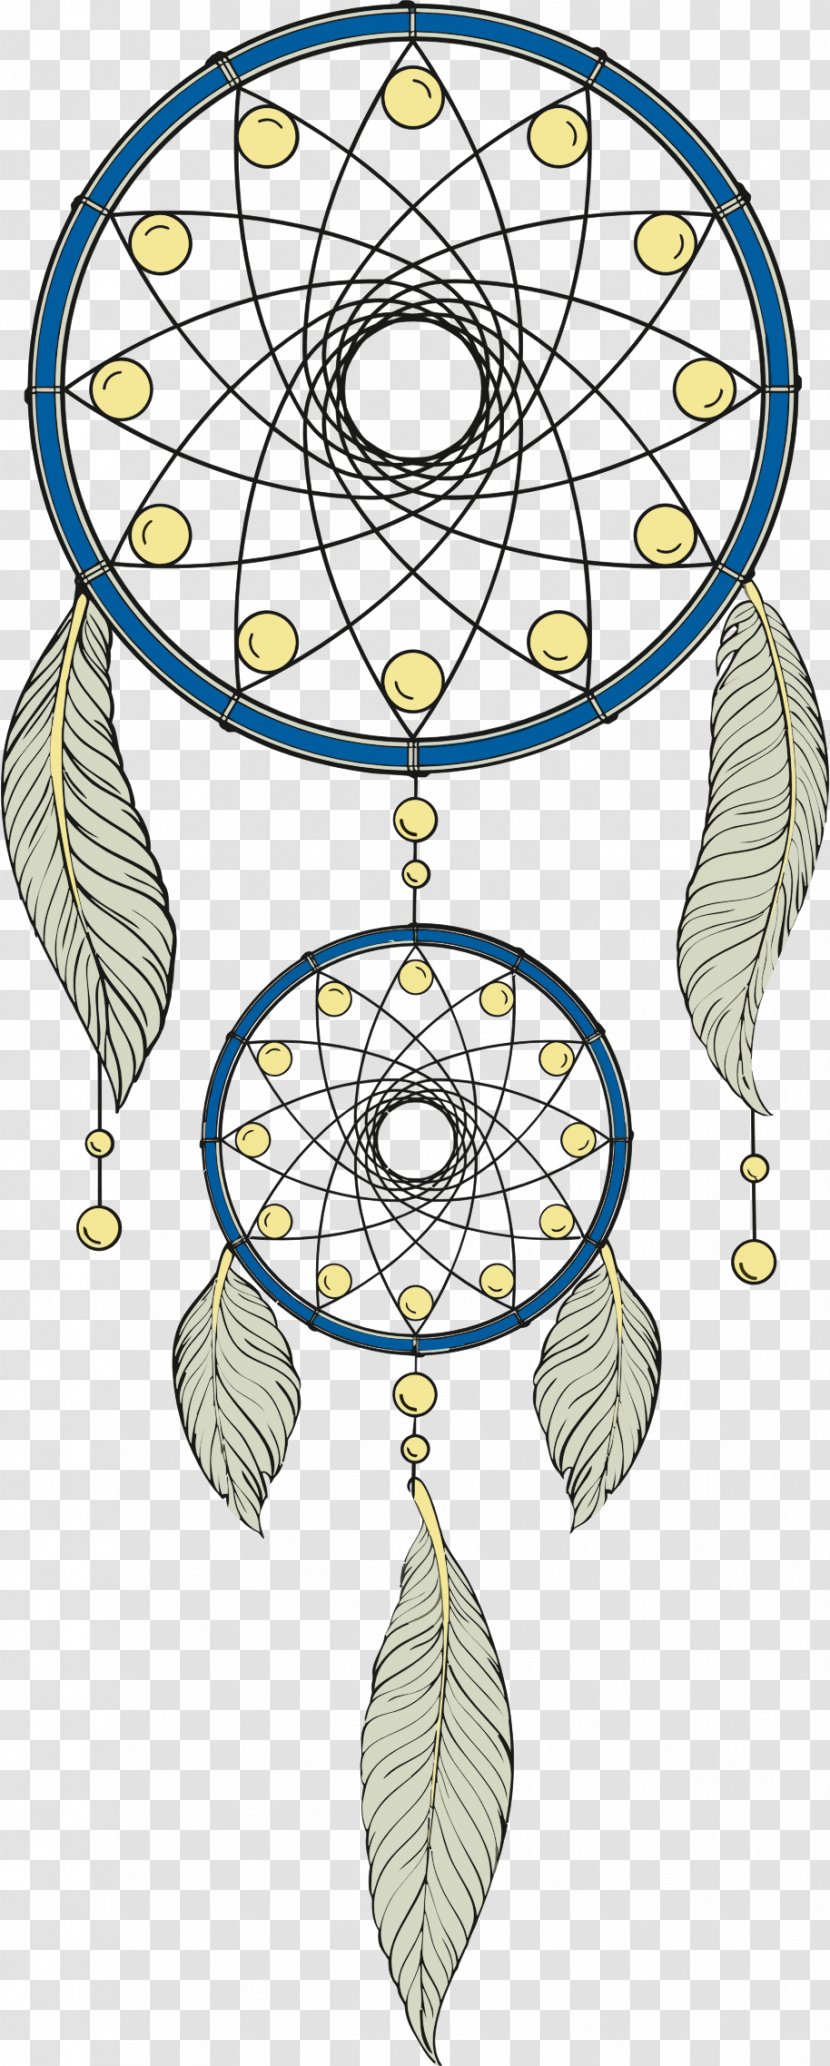 Dreamcatcher Indigenous Peoples Of The Americas Native Americans In United States Clip Art - Leaf Transparent PNG